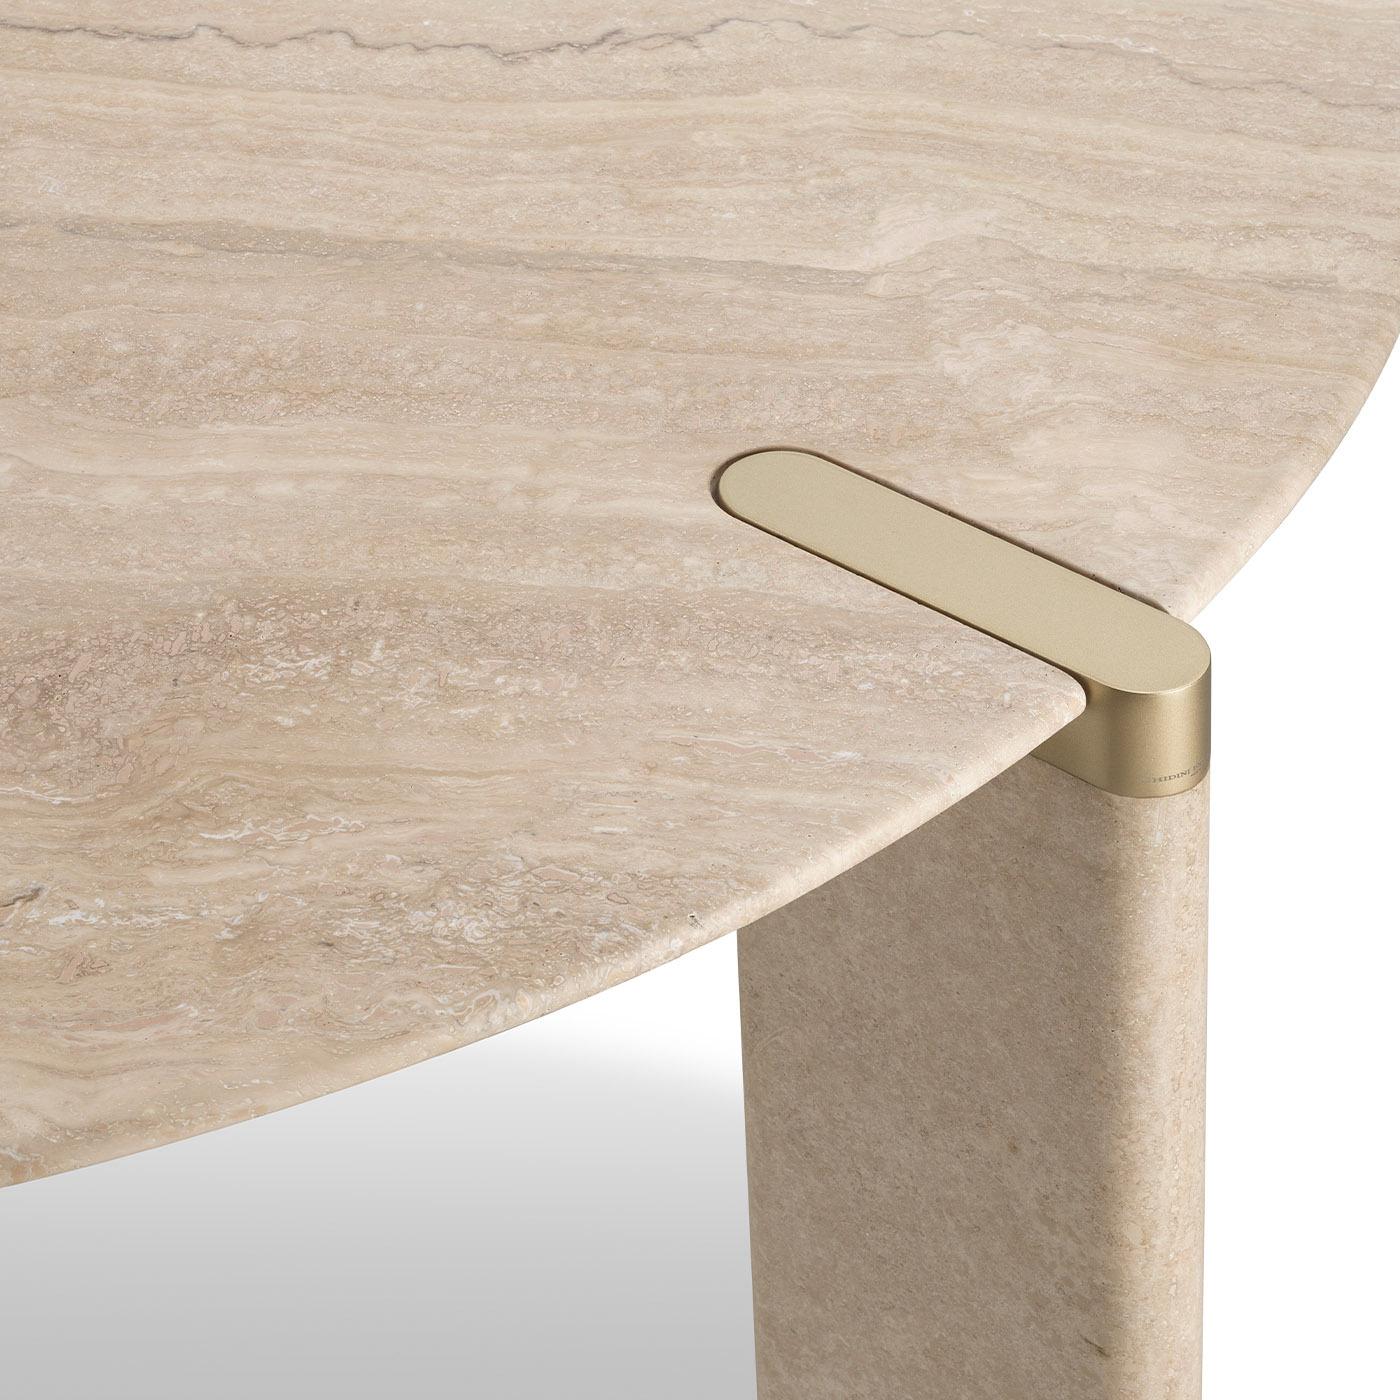 A design coupling luxury and sleekness, this round dining table was designed by Lorenza Bozzoli to allow the travertine marble's bare beauty fiercely shine through. Satin brass details accent the silhouette, where the circular top (Ø 160cm) is